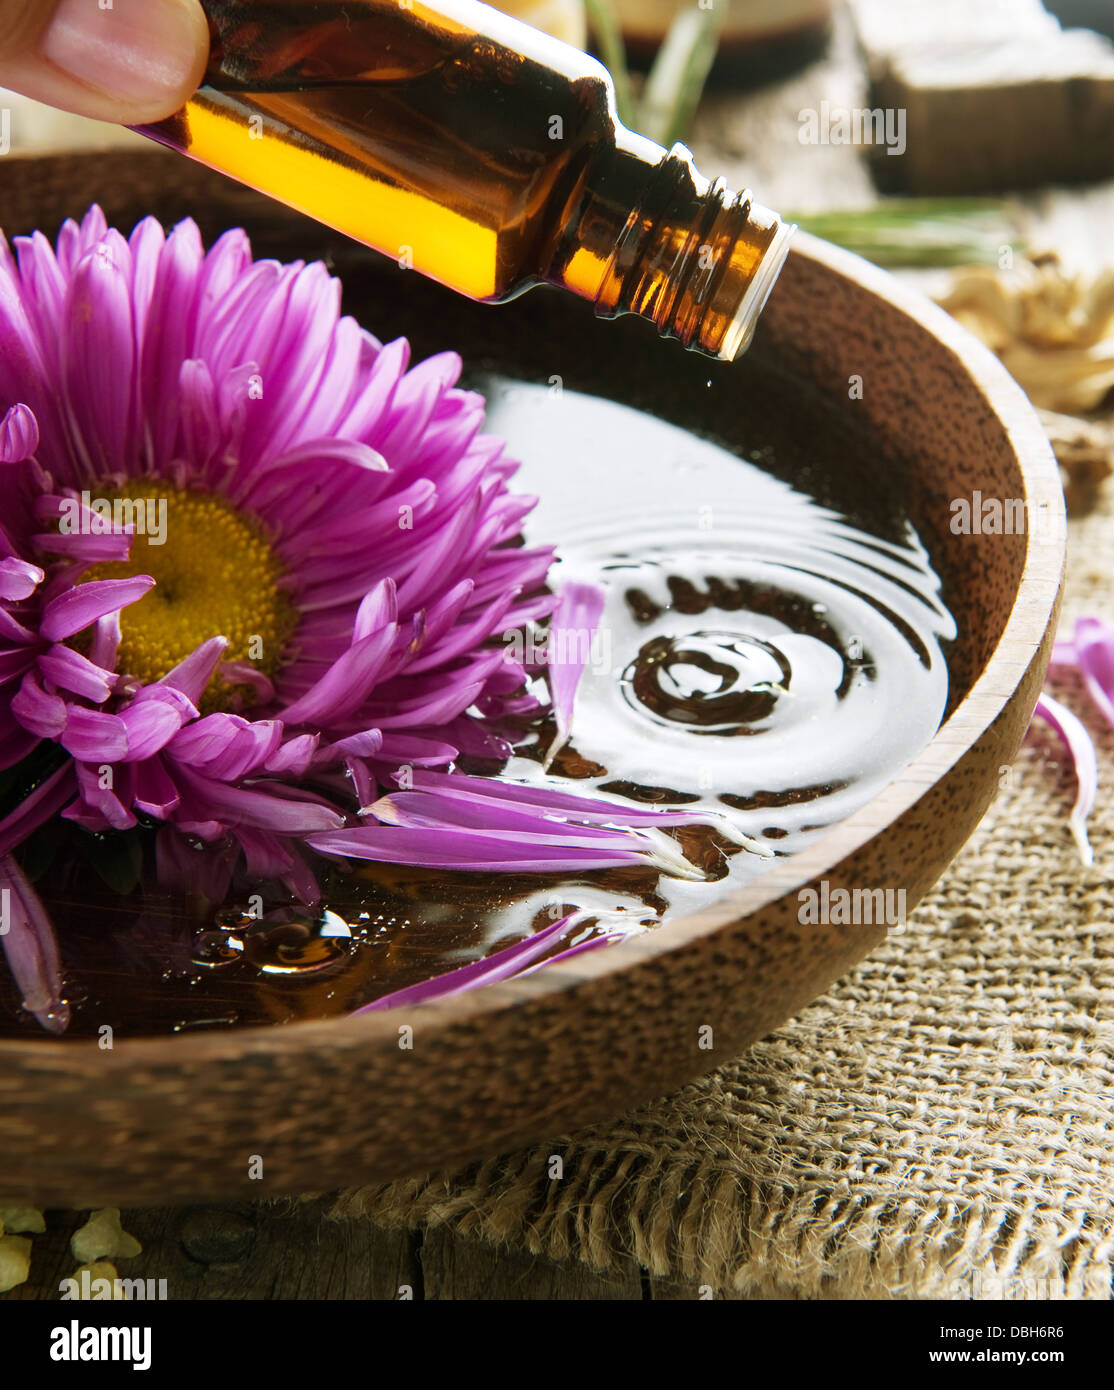 Aromatherapy. Essential Oil. Spa And Beauty Treatment Stock Photo